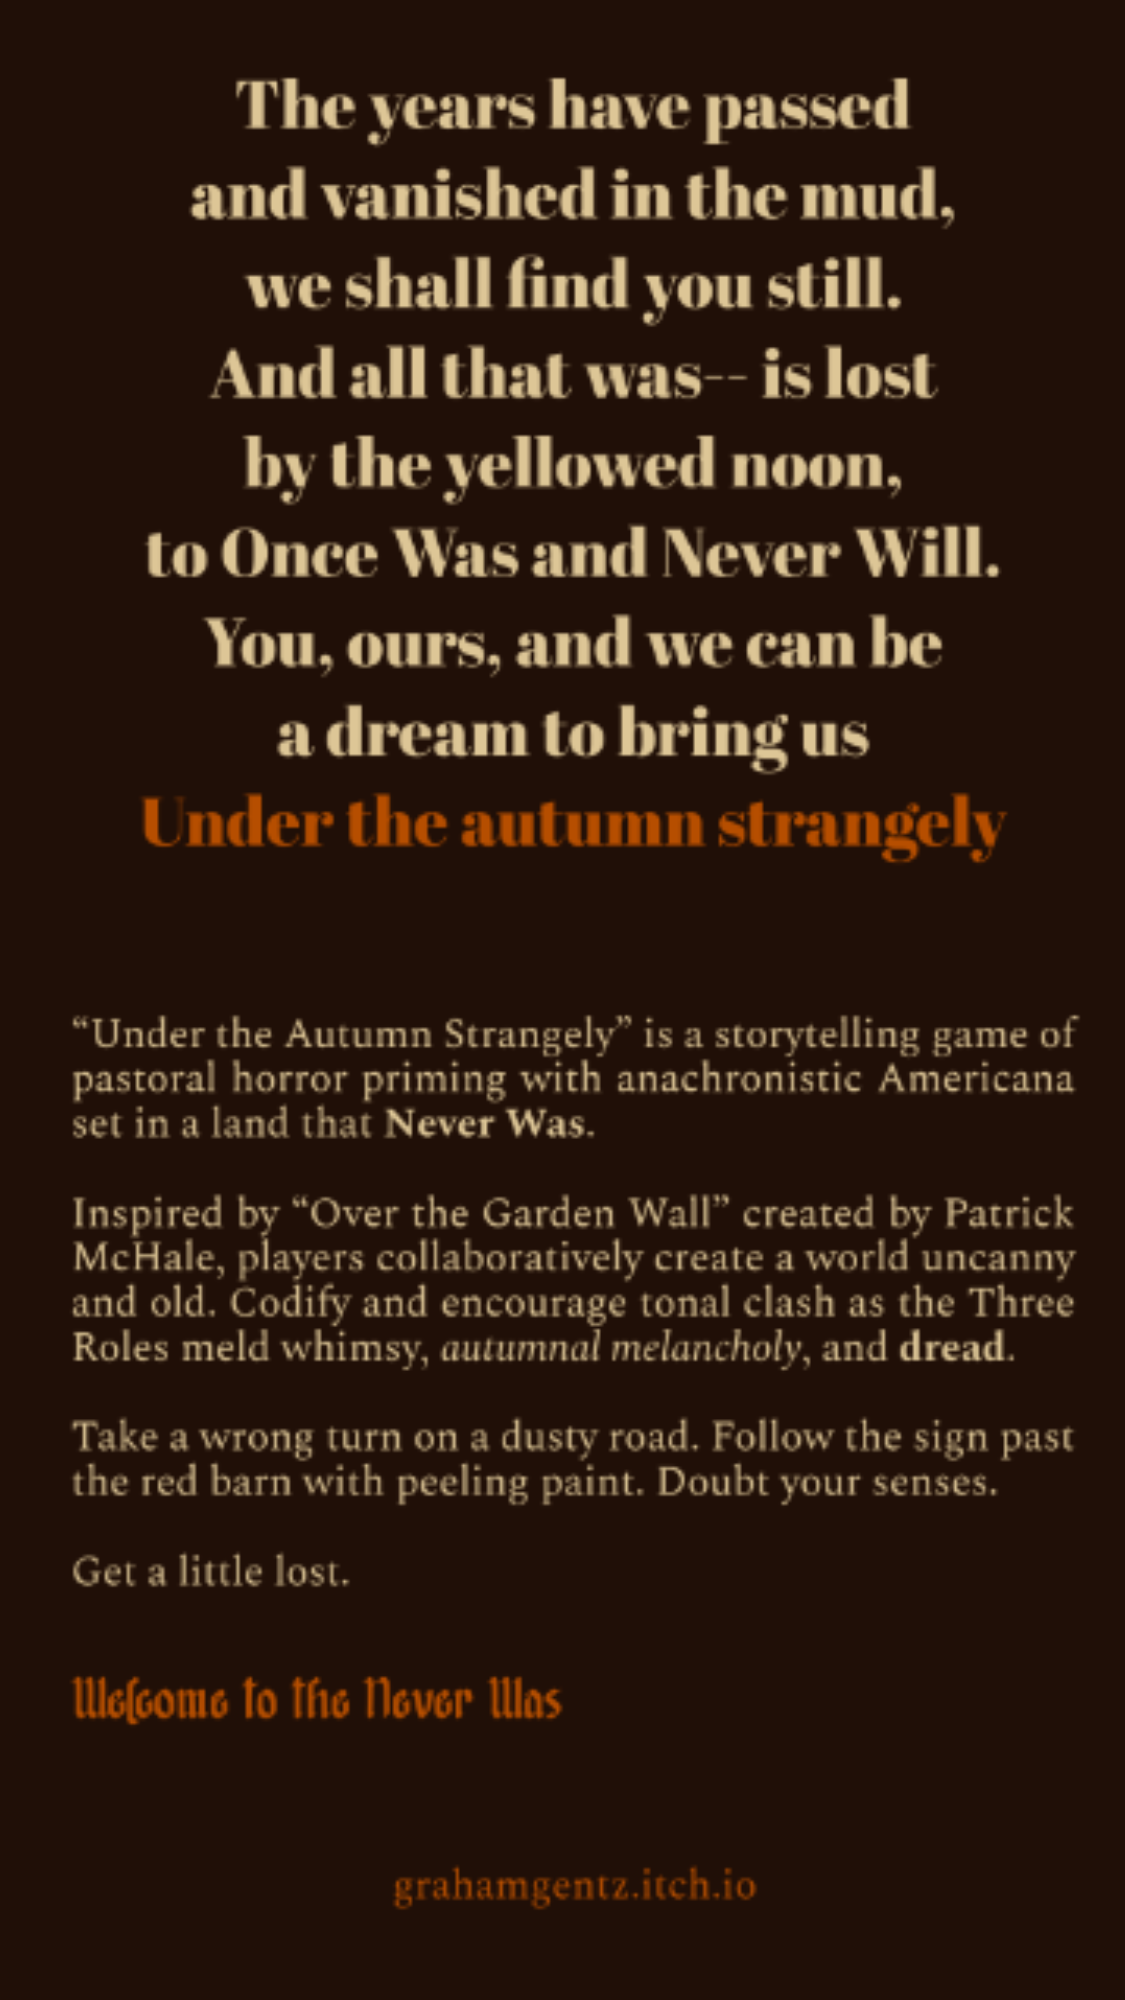 Under the Autumn Strangely - Bards & Cards